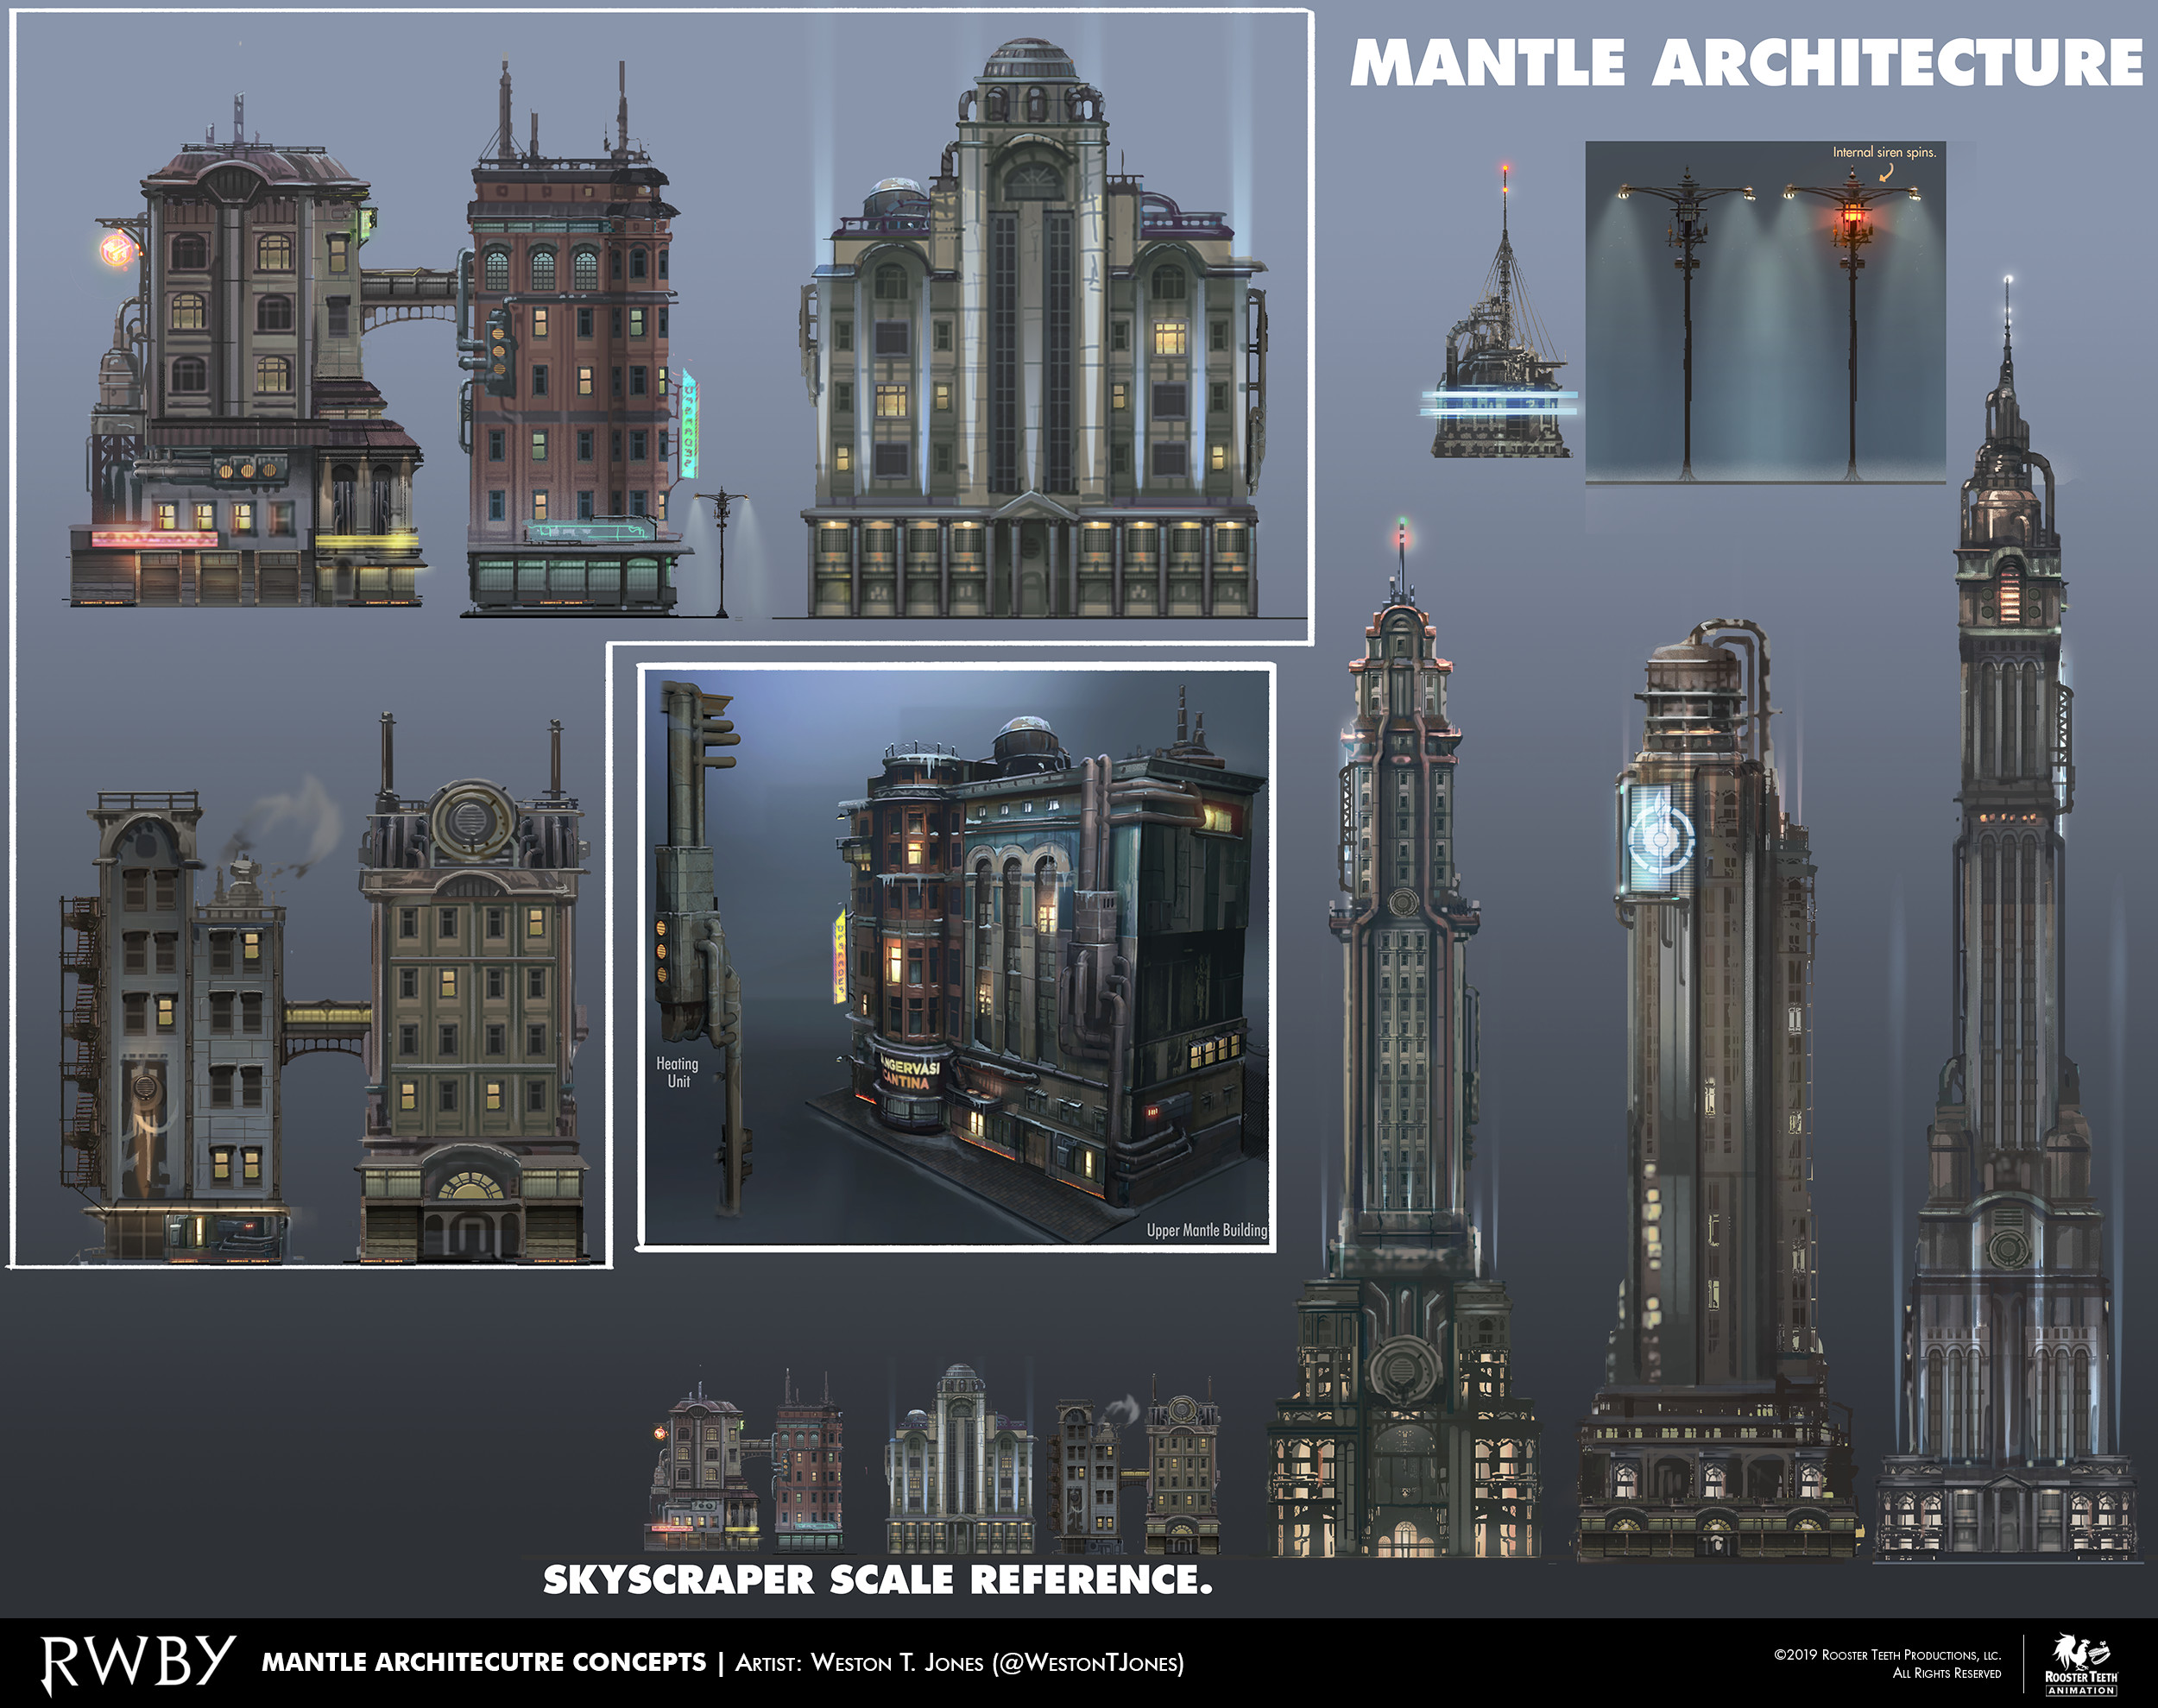 Some loose concepts to demonstrate the architectural style of Mantle to the team.